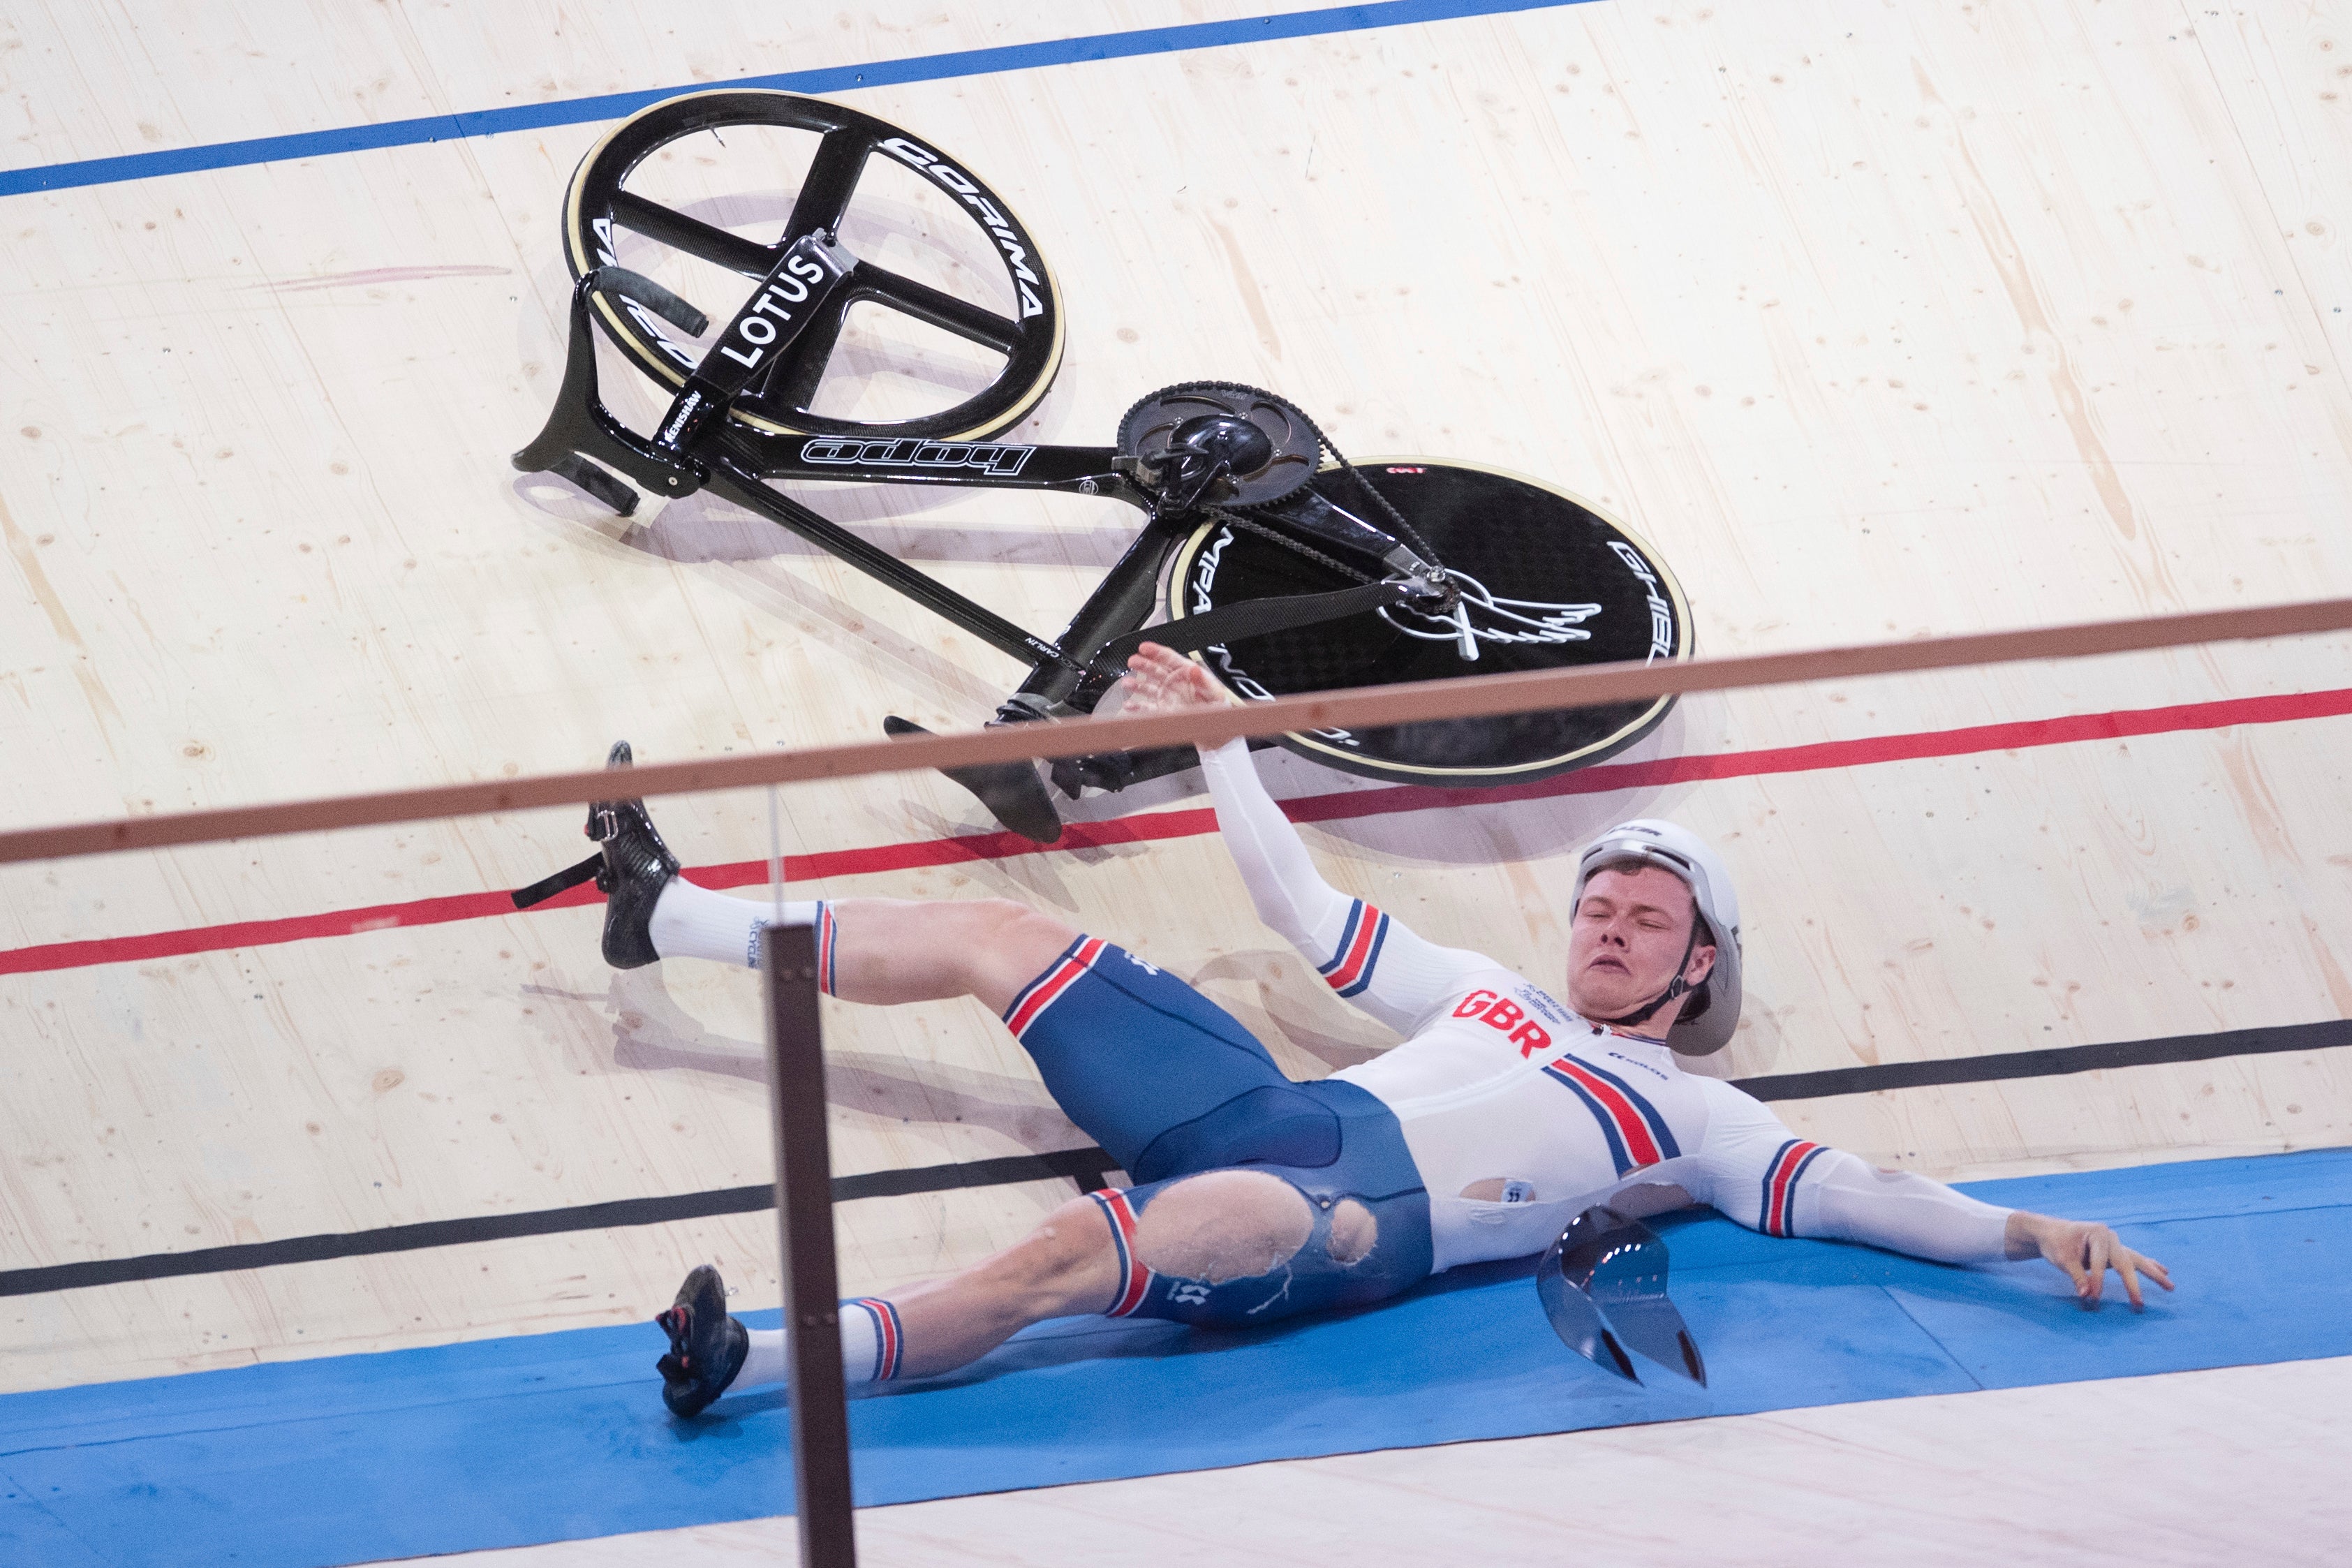 Great Britain’s Jack Carlin crashed during the men’s sprint